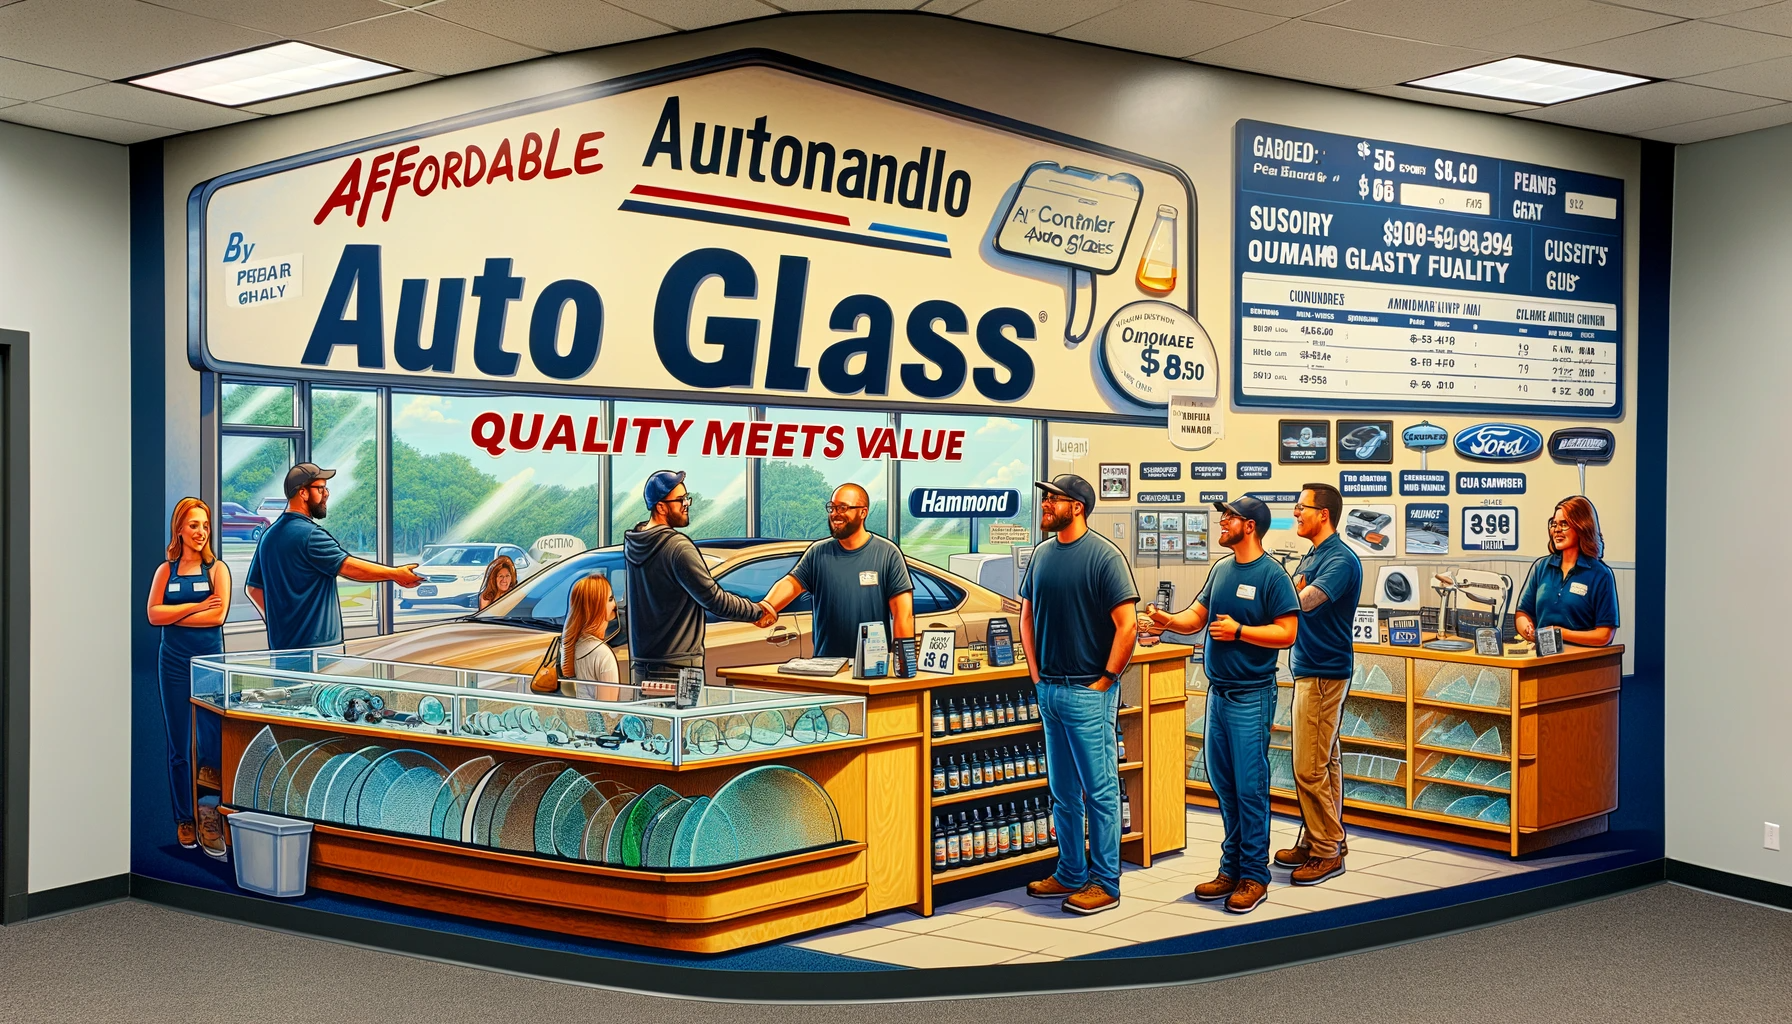 Affordable Auto Glass Solutions in Hammond: Quality Meets Value